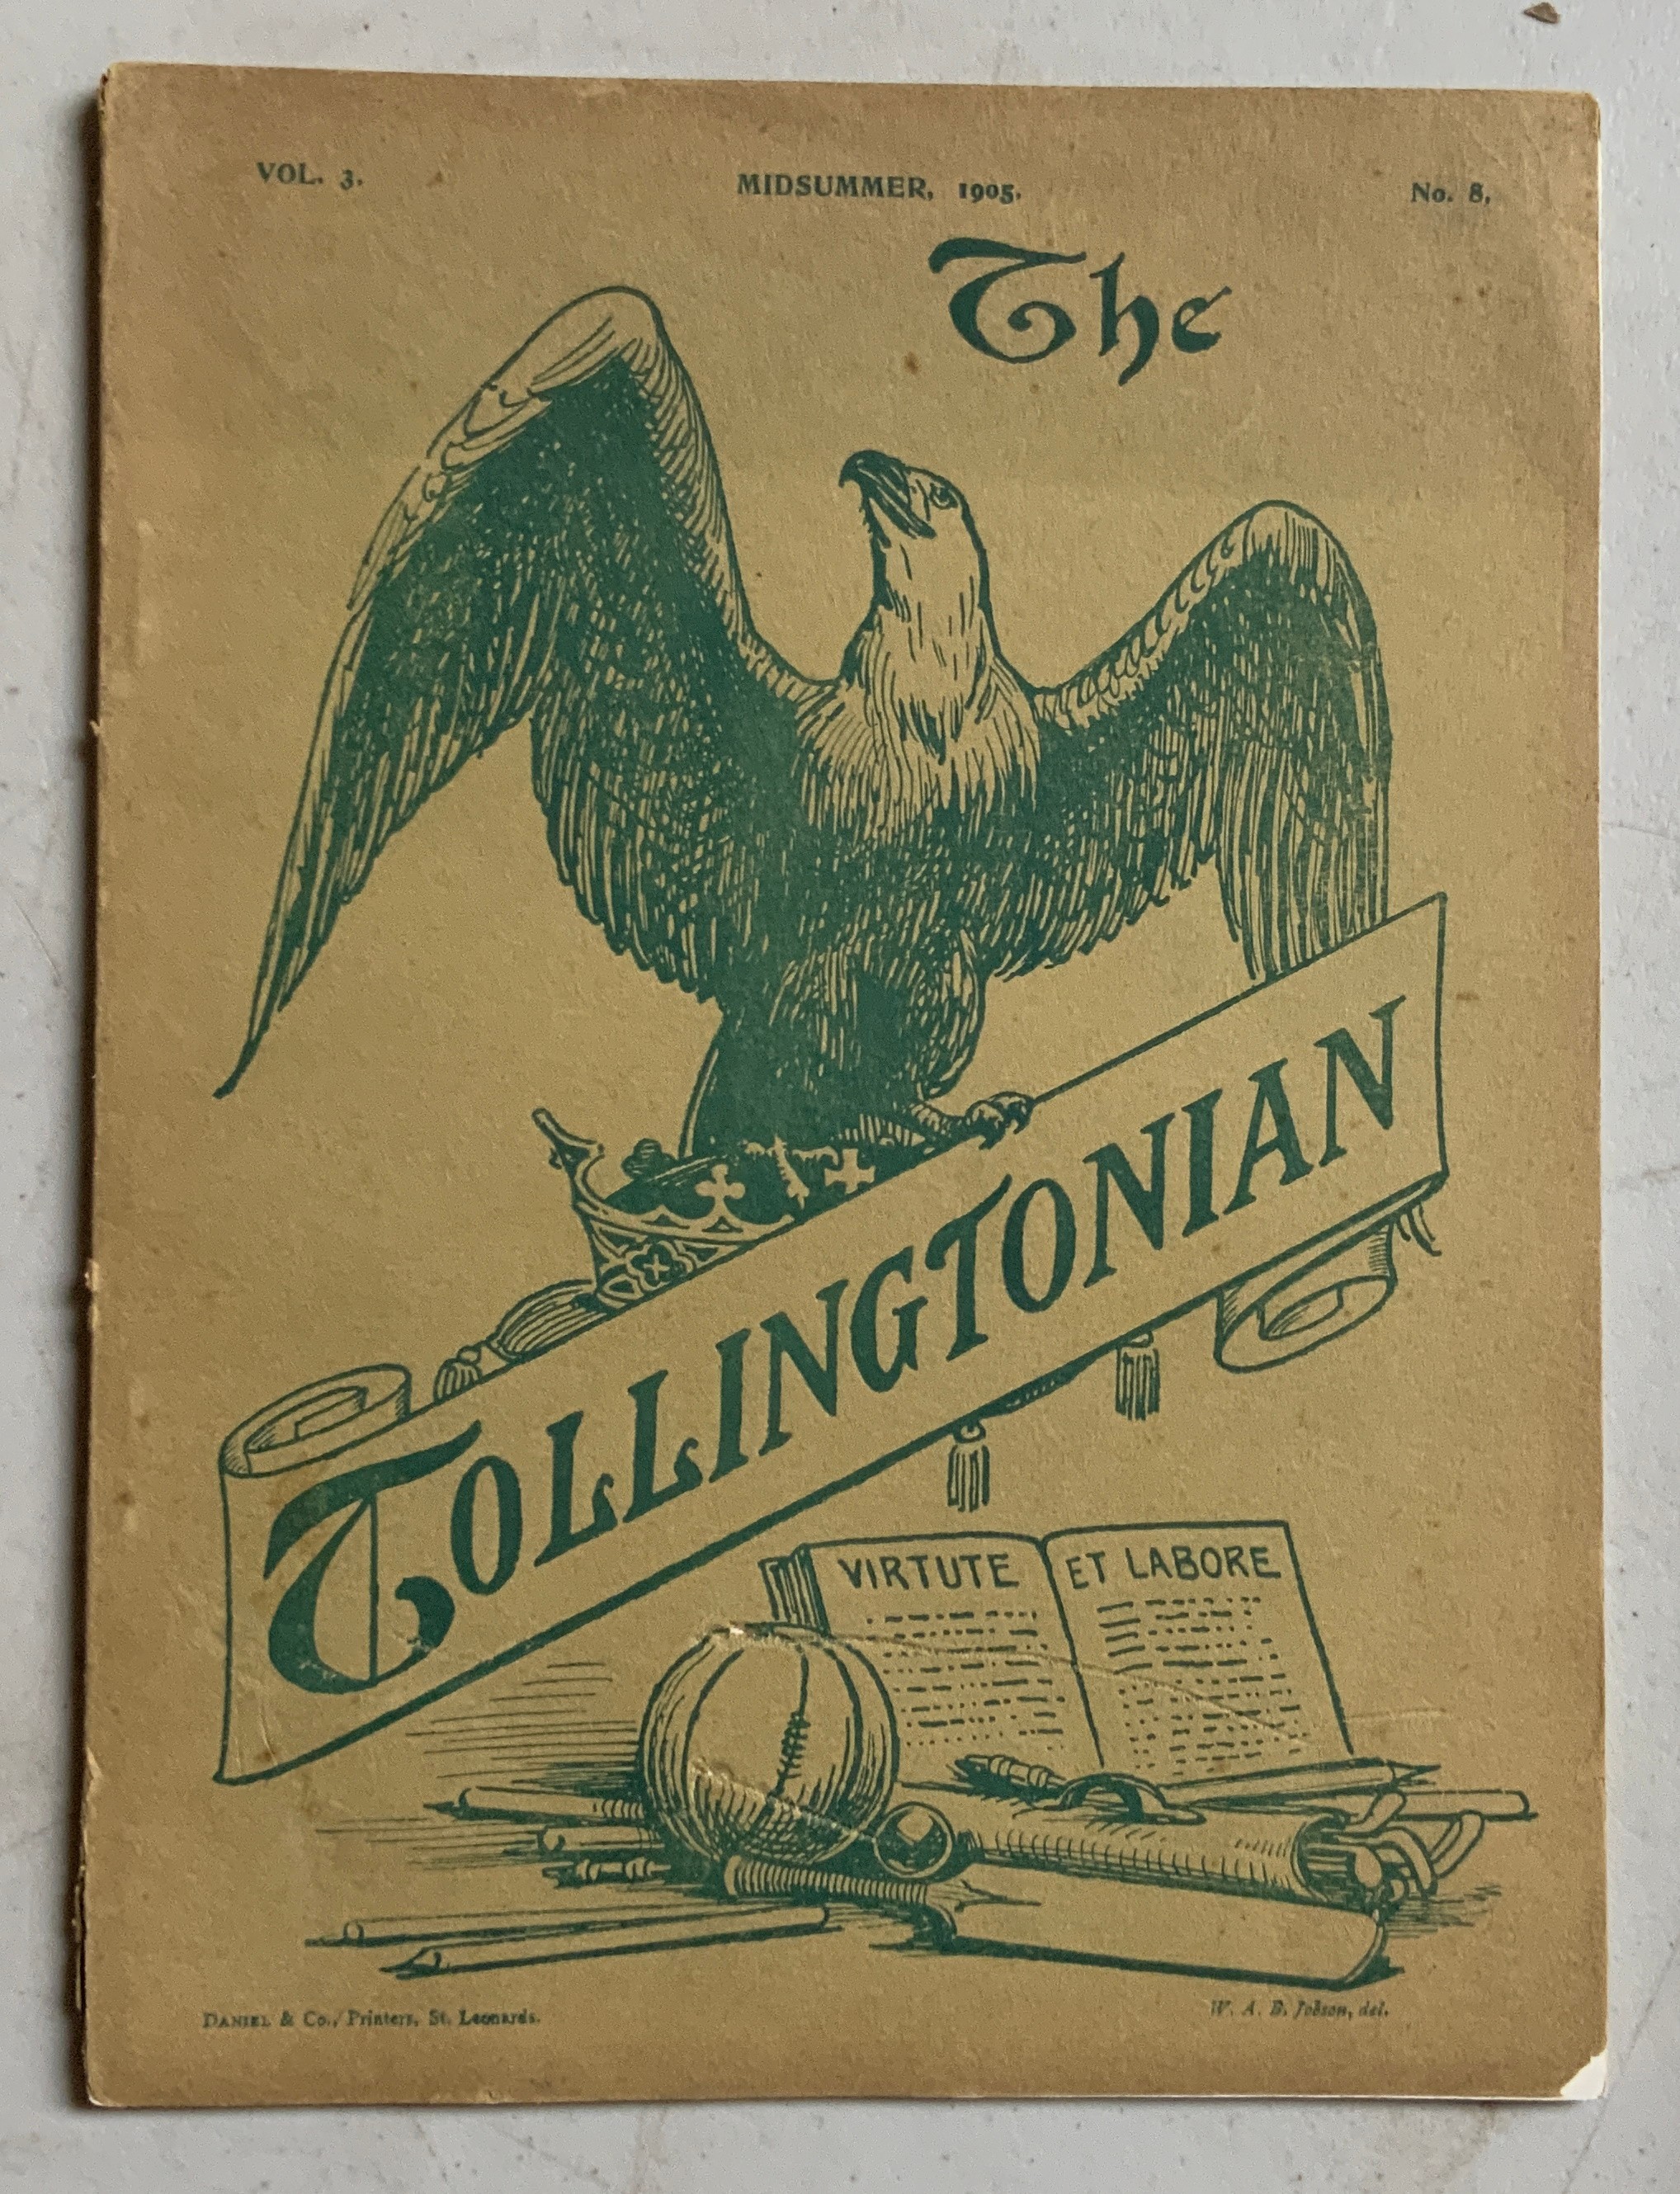 SELECTION OF THE TOLLINGTONIAN JOURNAL 1903 - 1906